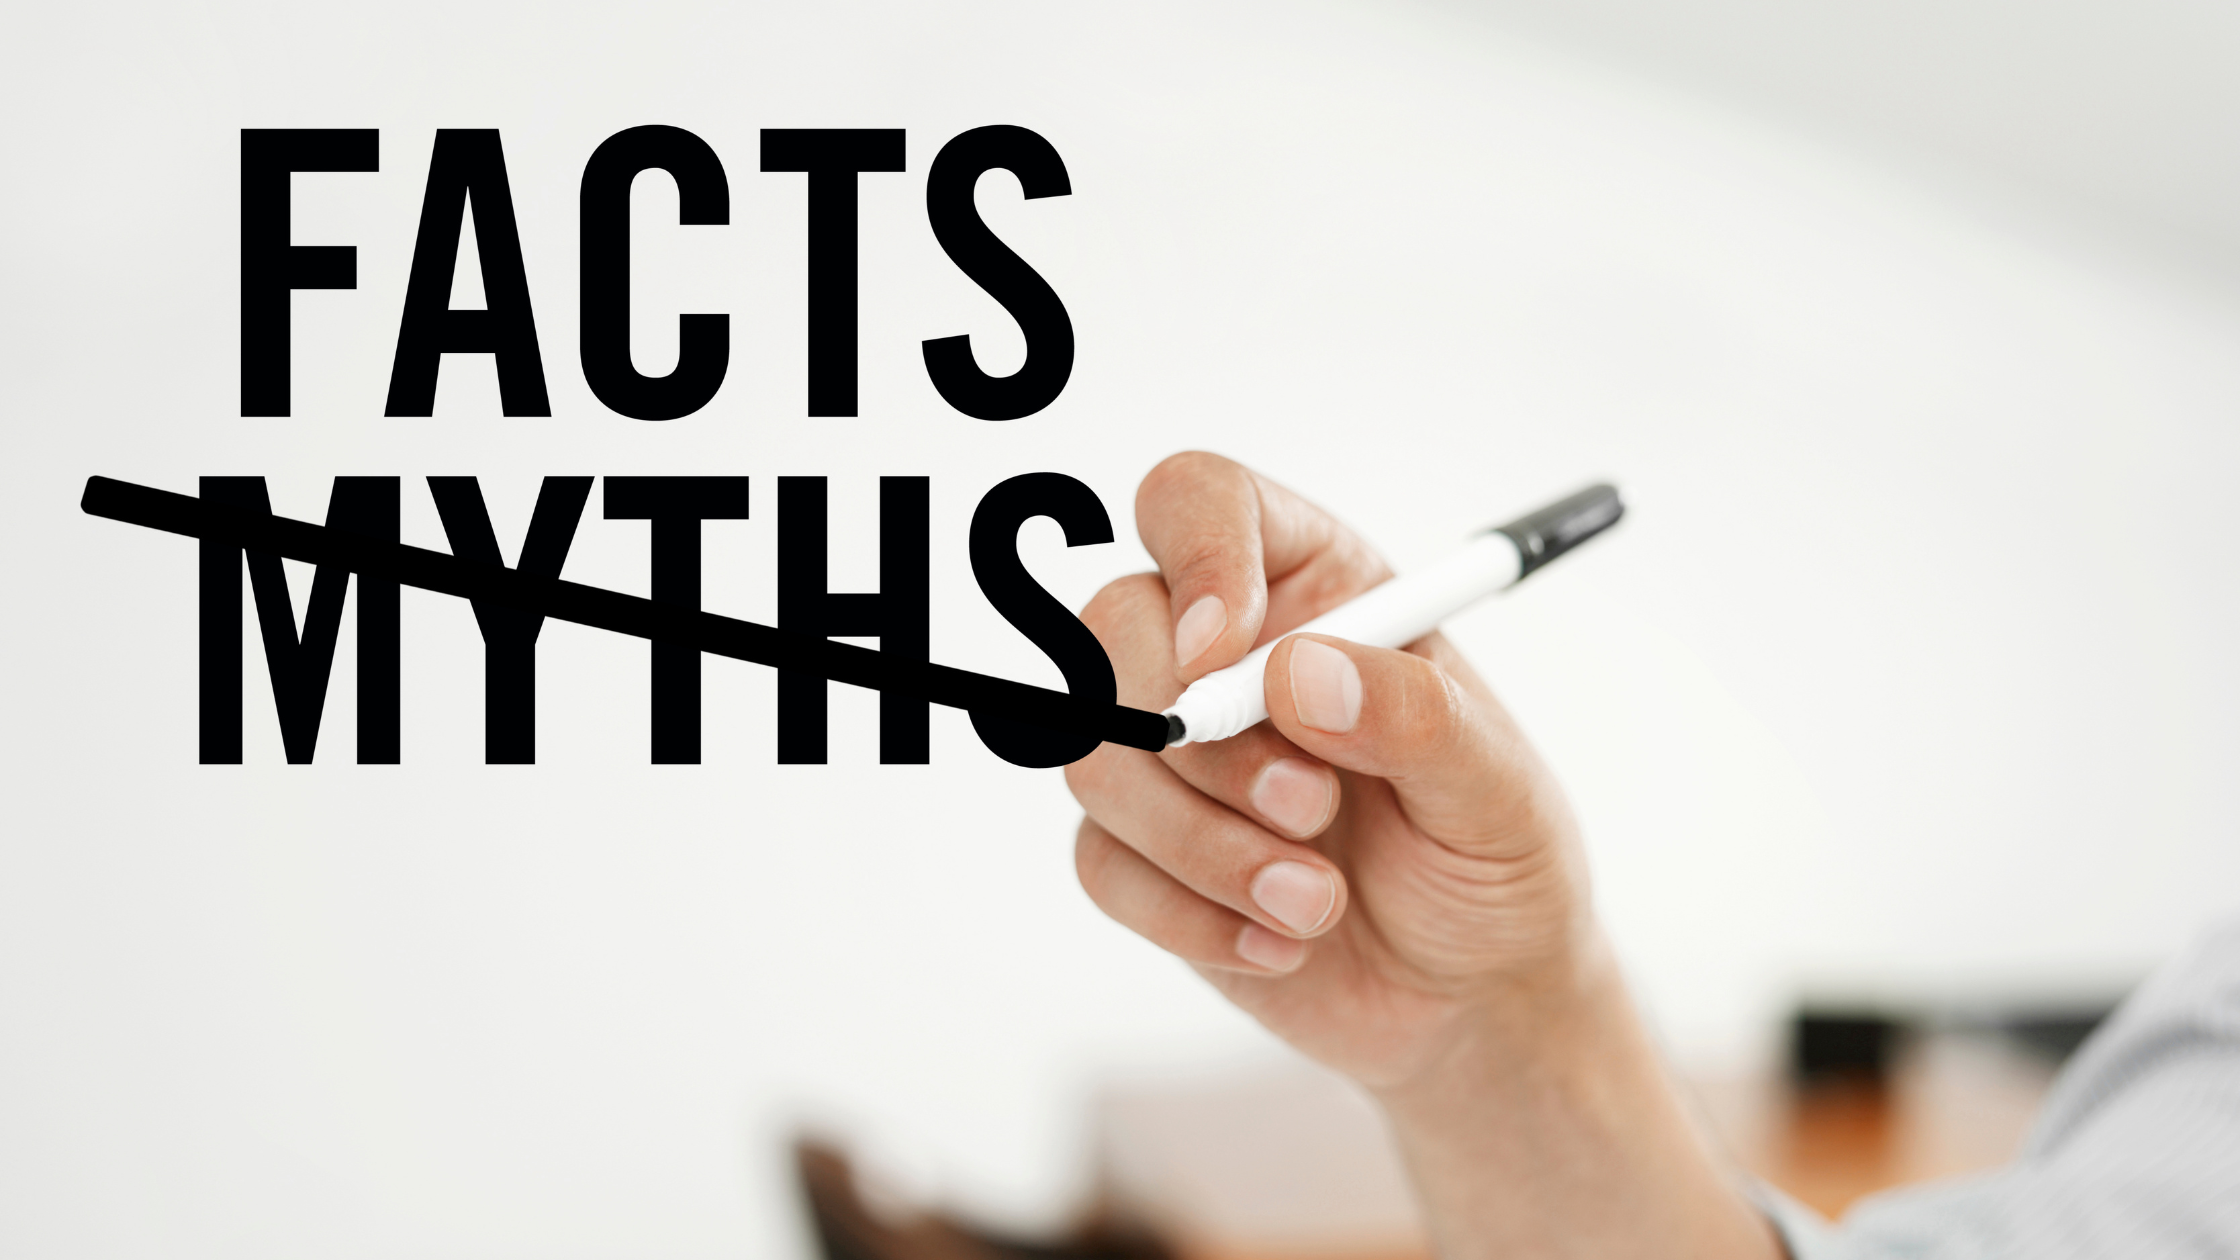 Top 5 Myths About Surgical Weight Loss Debunked